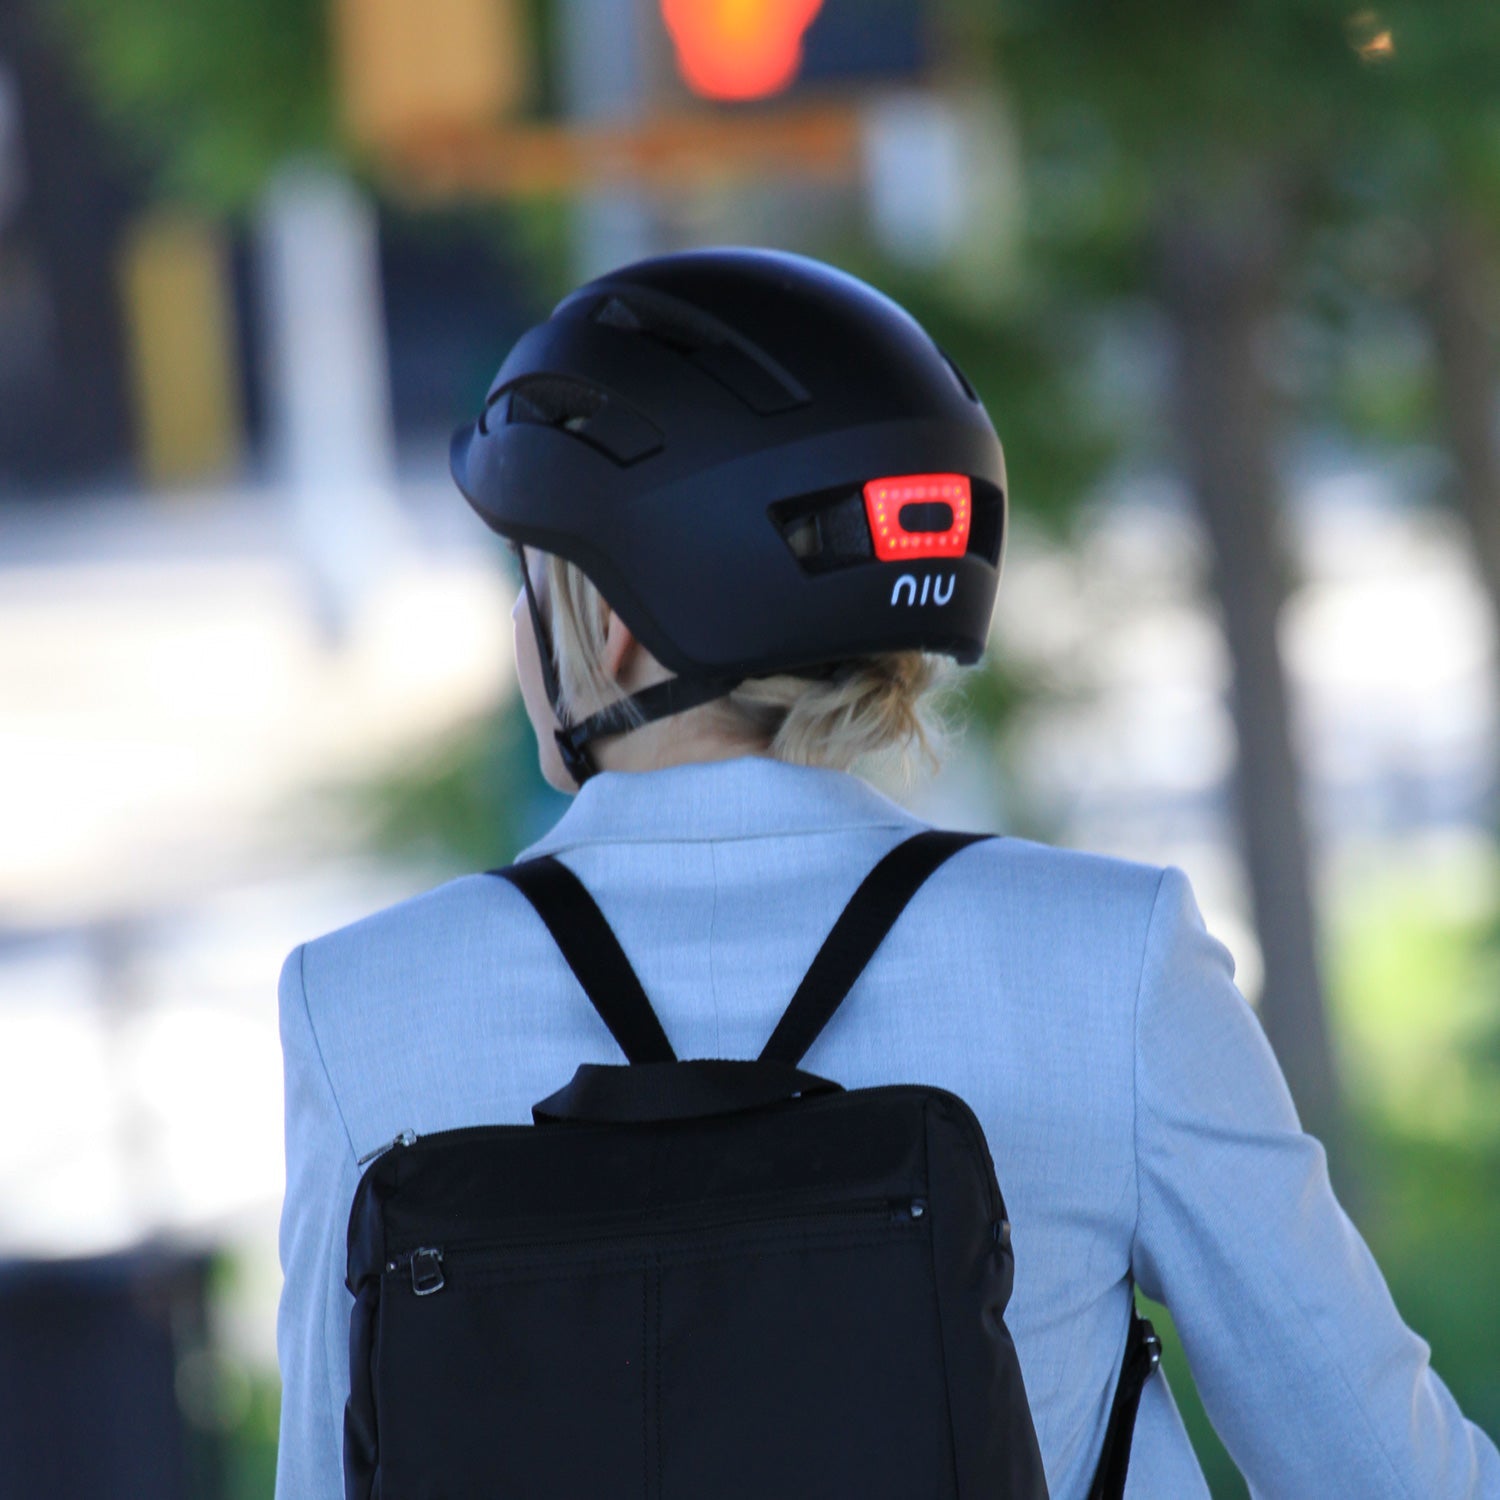 NIU Electric Scooter Helmet with LED Light